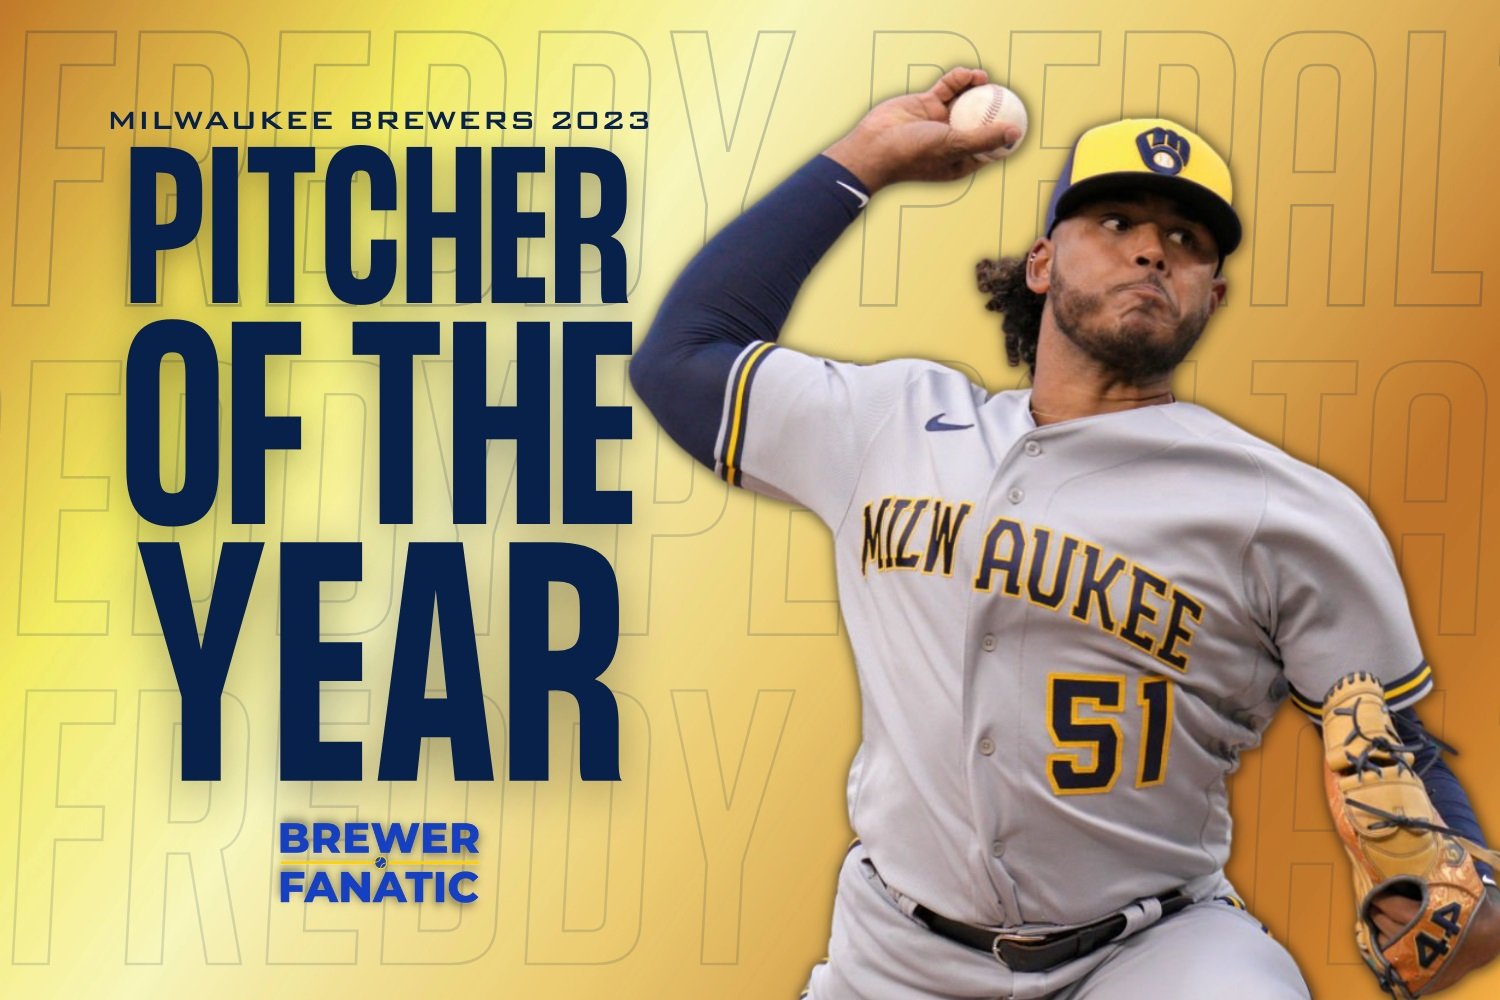 The 2023 Milwaukee Brewers Pitcher of the Year - Brewers - Brewer Fanatic